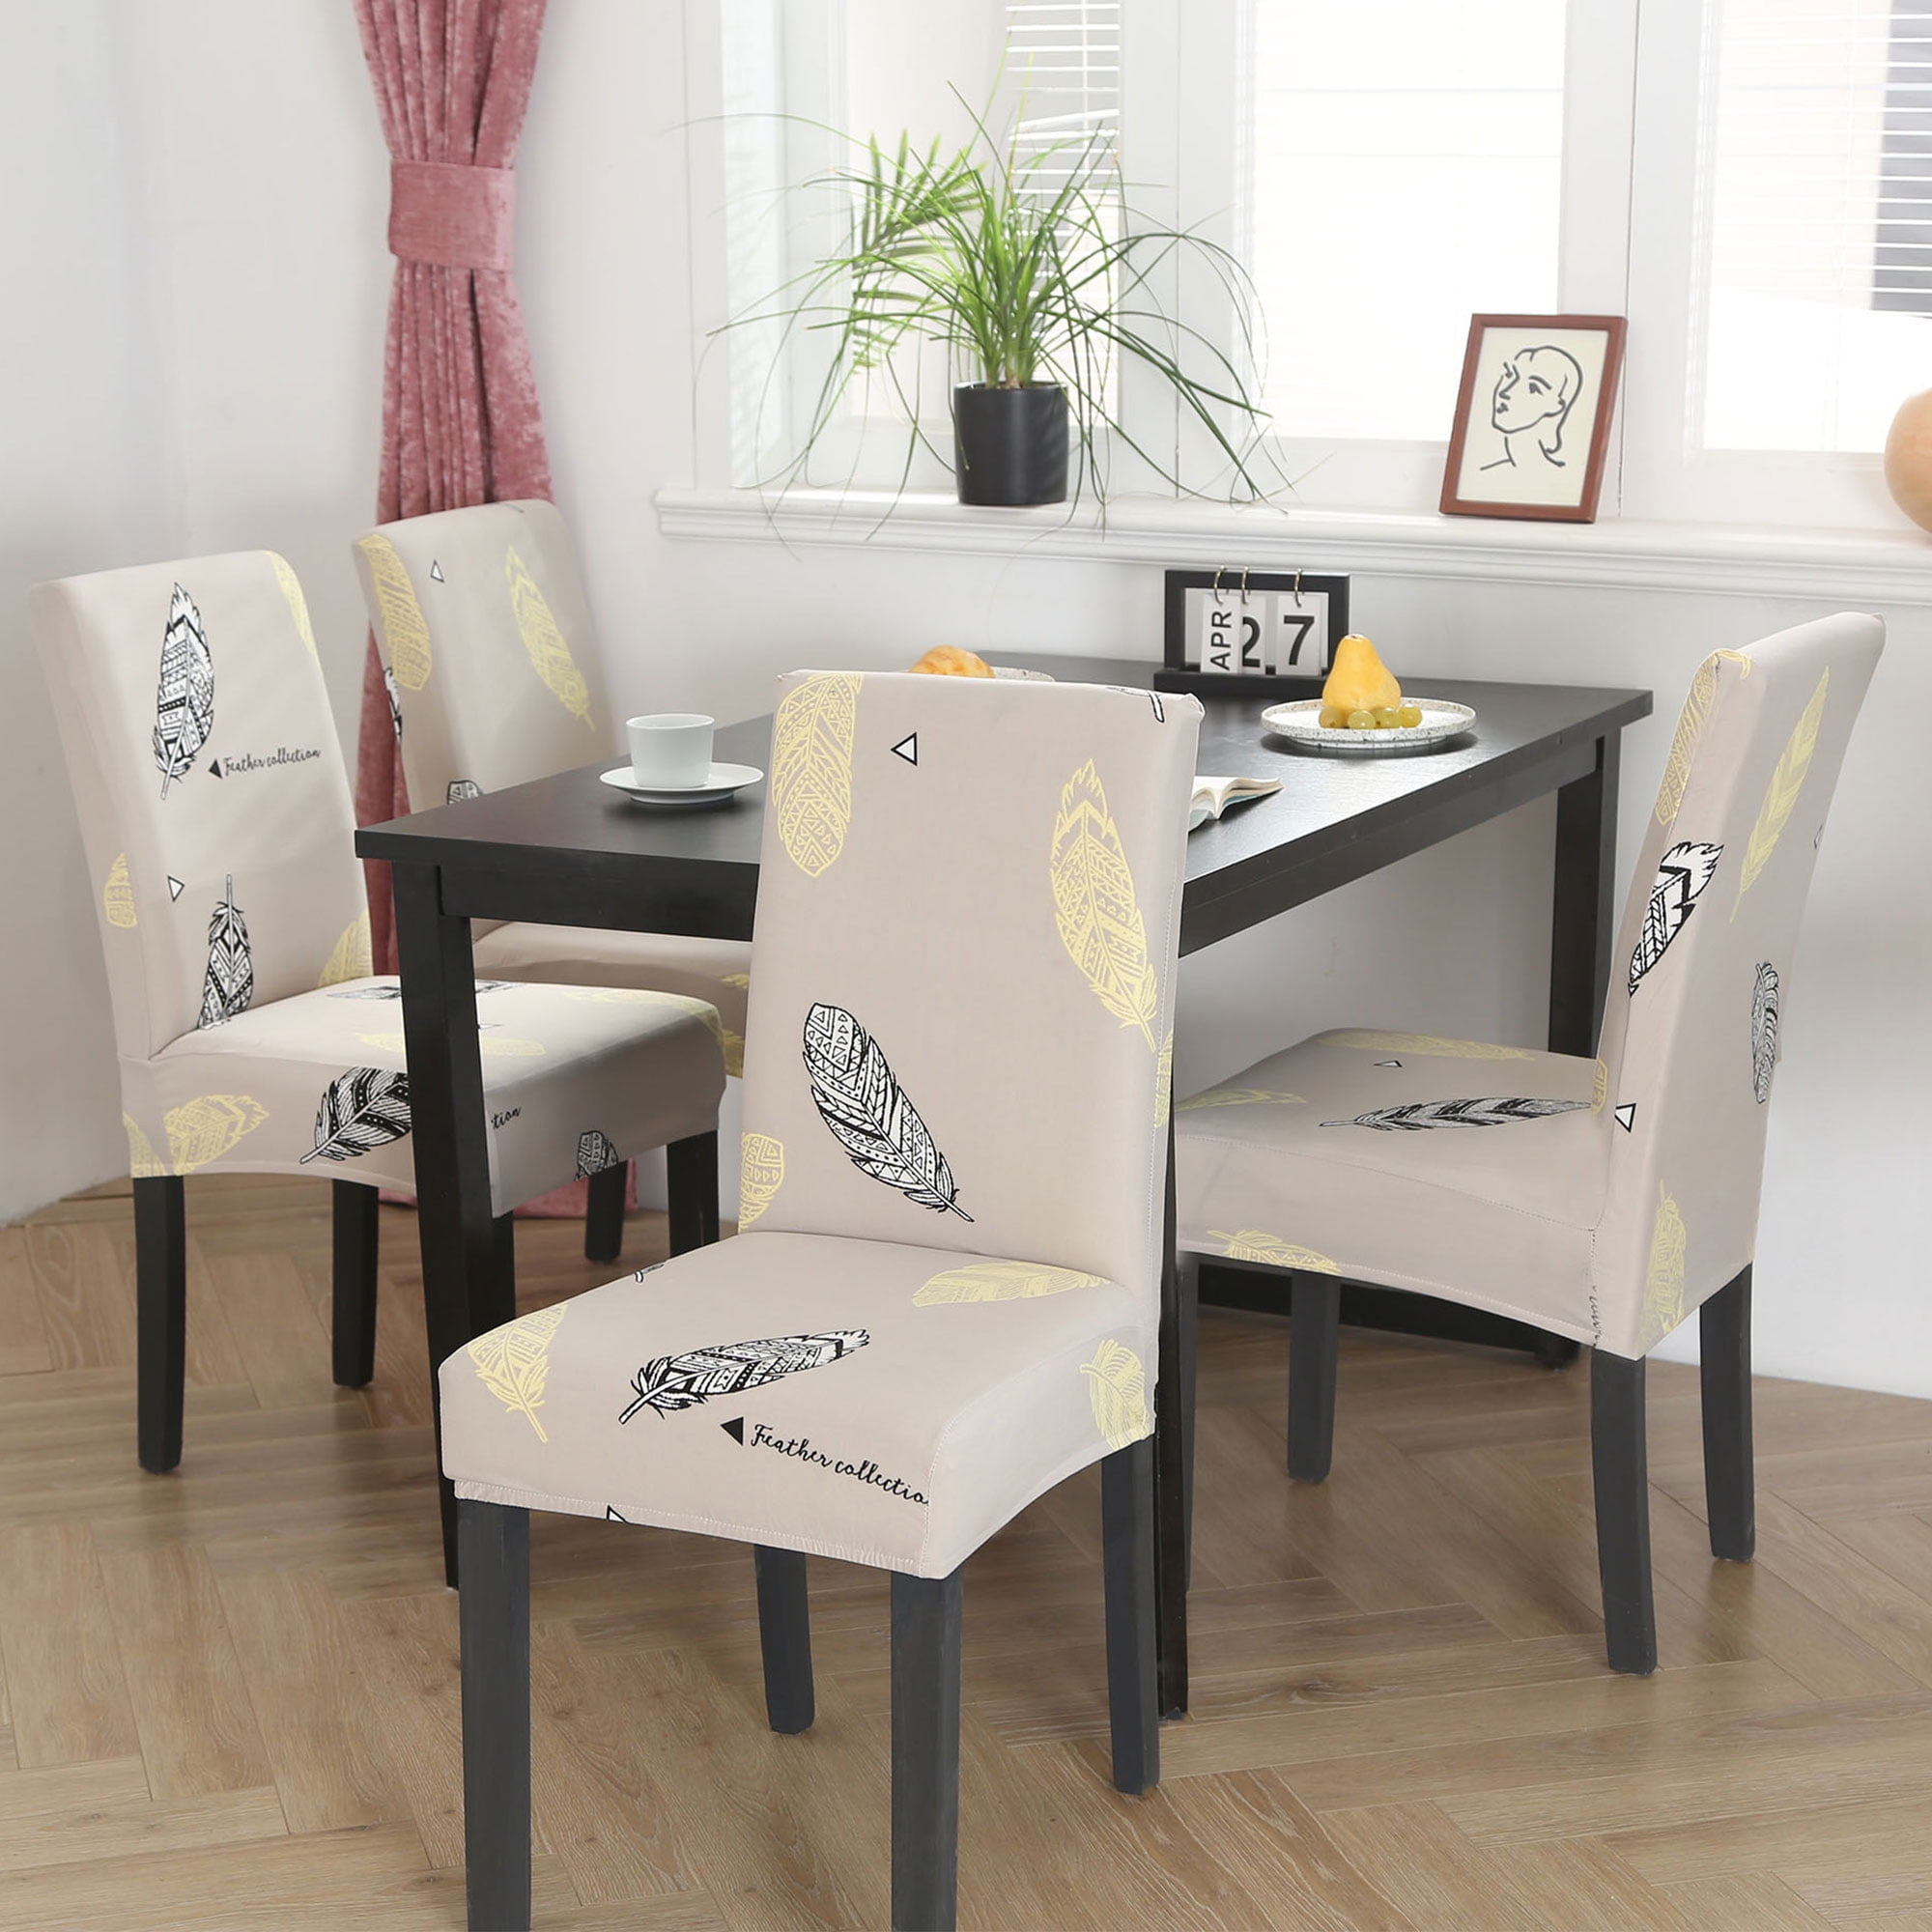 Details about   Crushed Velvet Kitchen Dining Chair Covers High Back Chair Slipcover Stretchable 